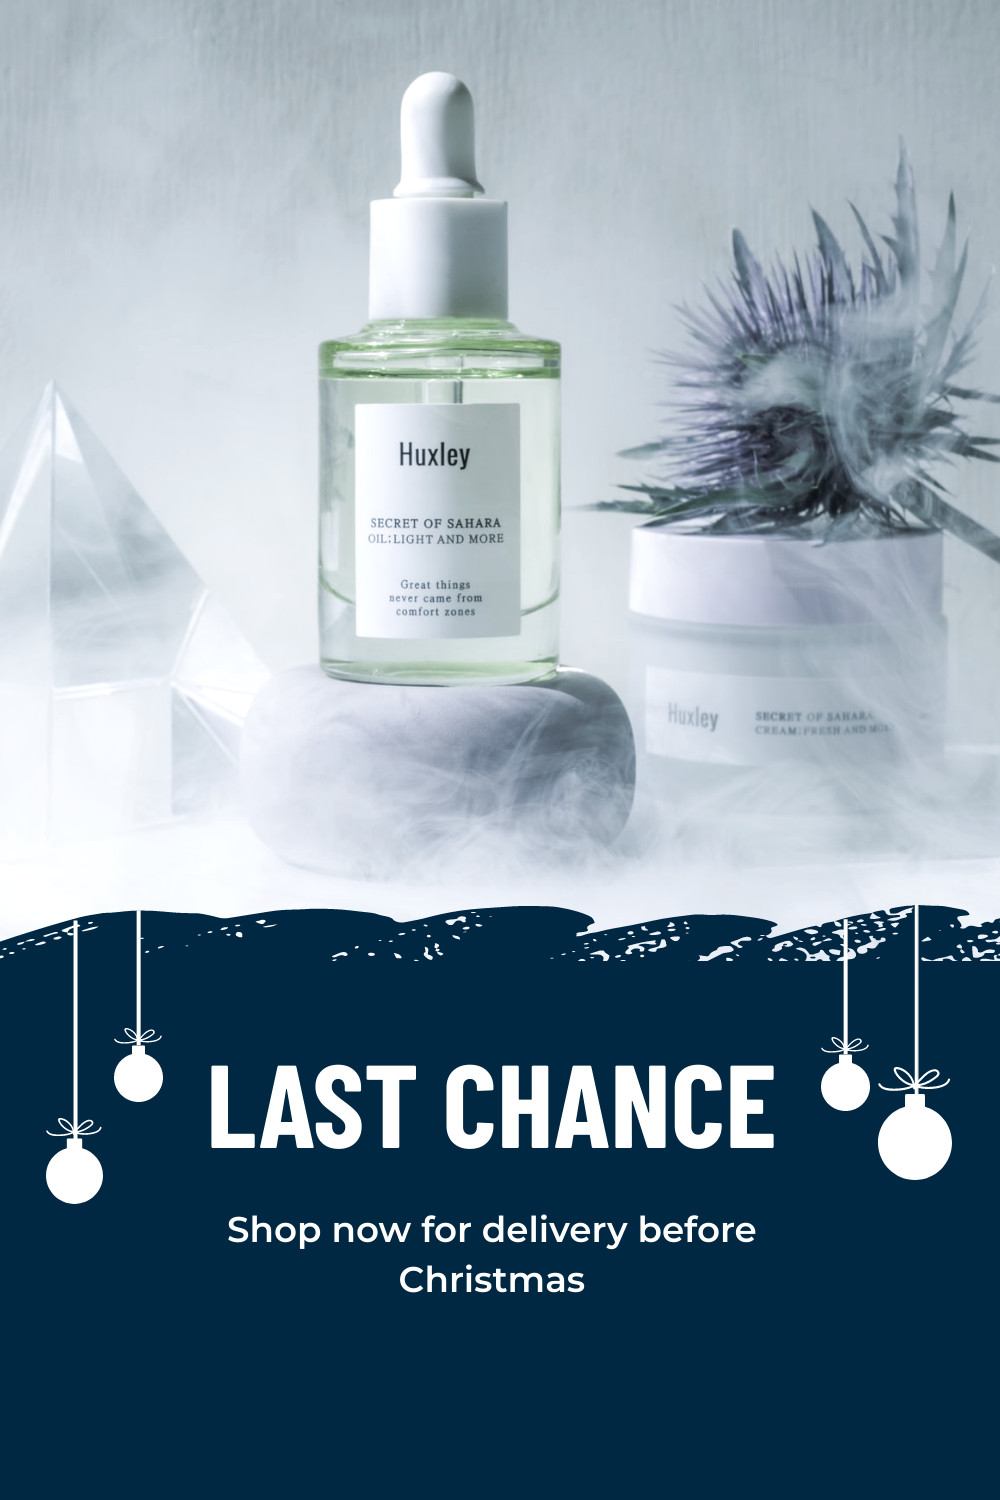 Last Chance Skin Care Christmas Facebook Cover 820x360